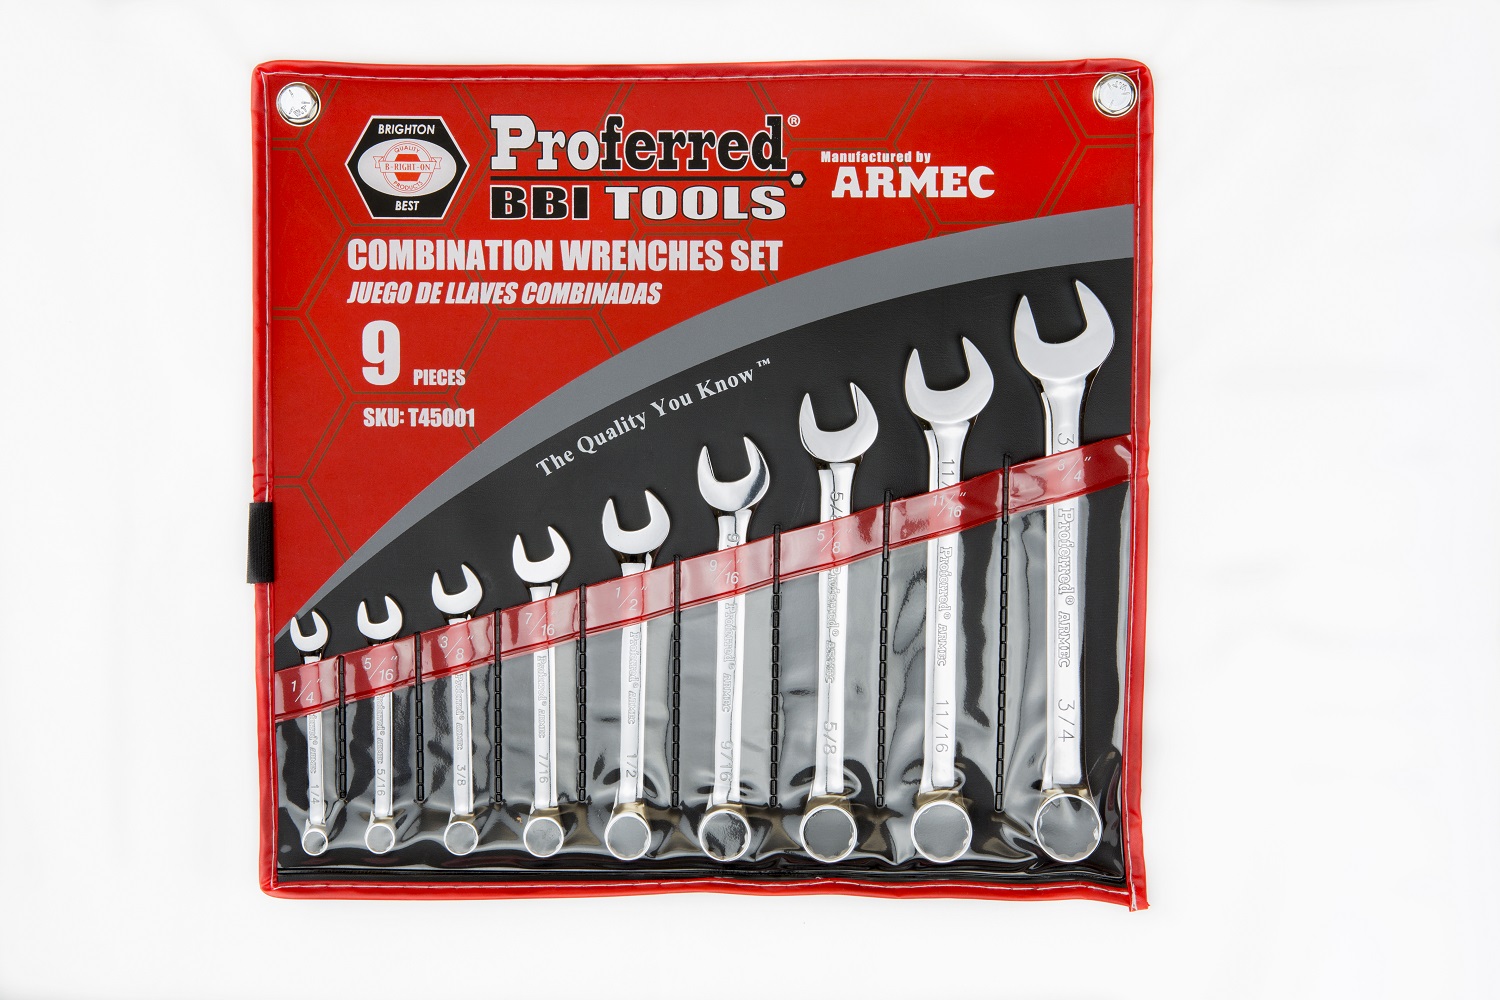 PROFERRED COMBINATION WRENCH SET 1/4 - 3/4'' 9 PIECE SET